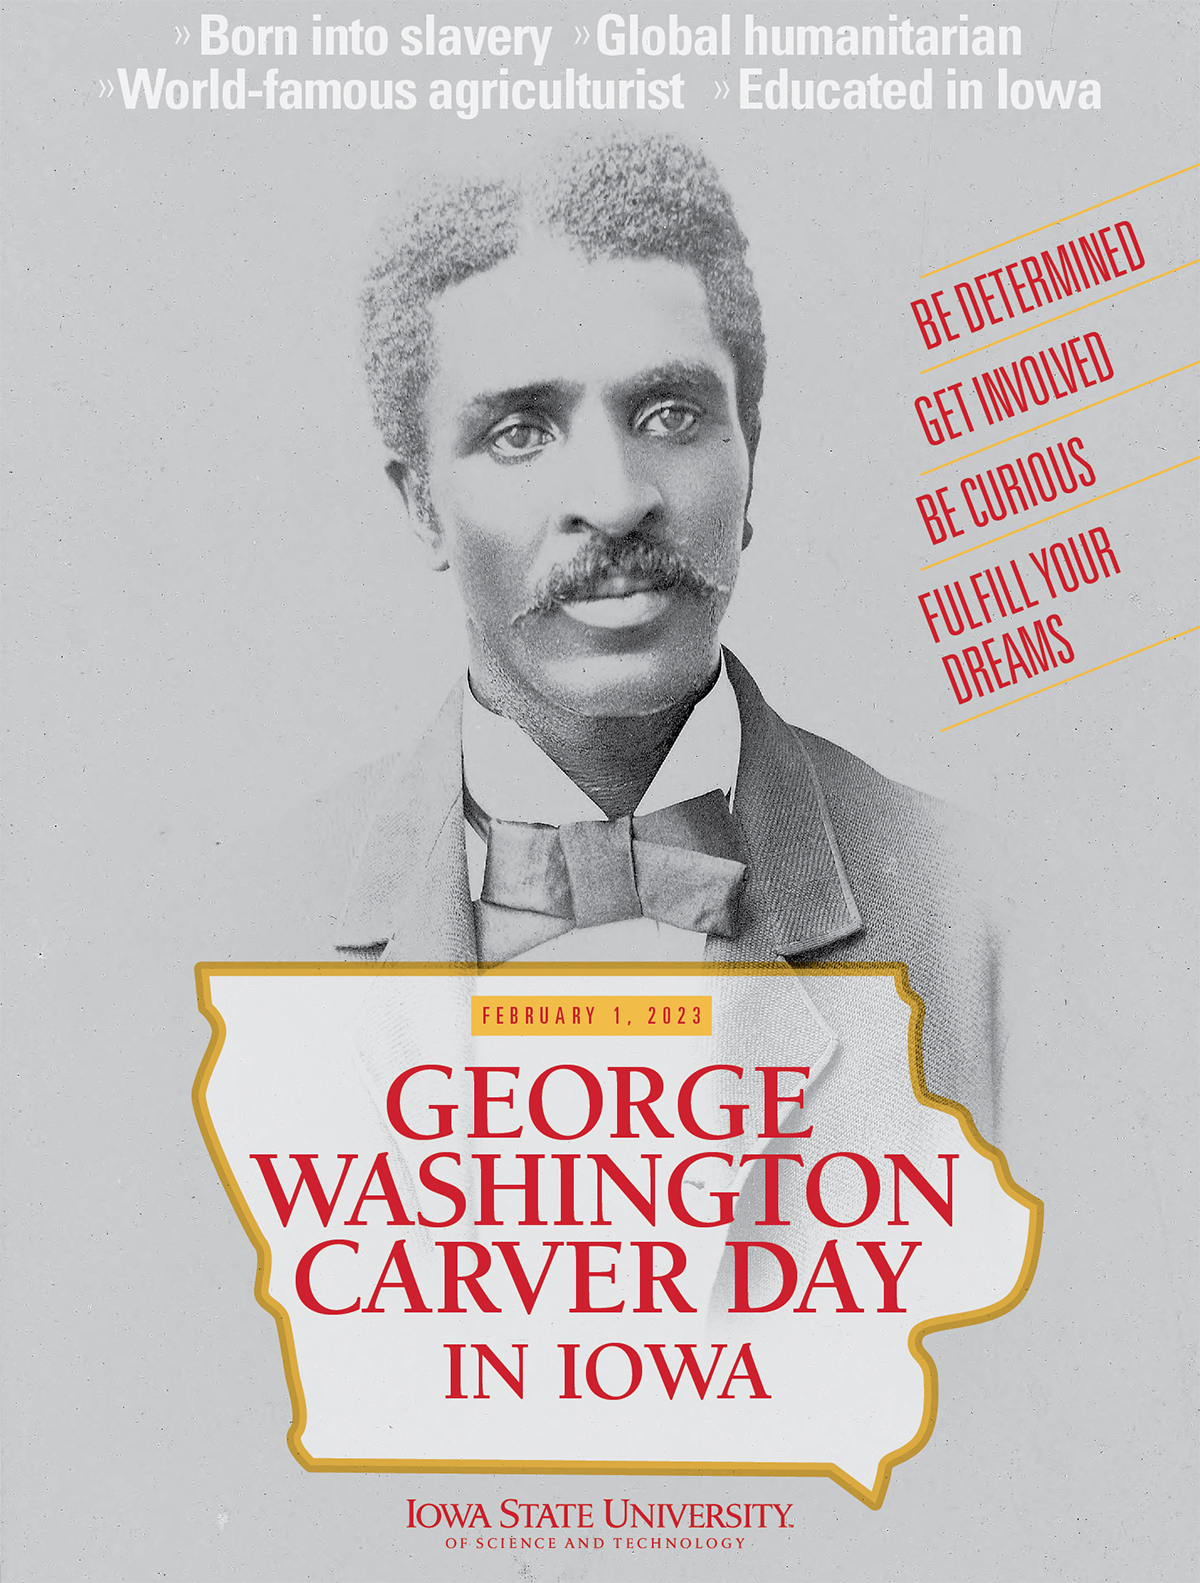 Gray poster promoting George Washington Carver Day